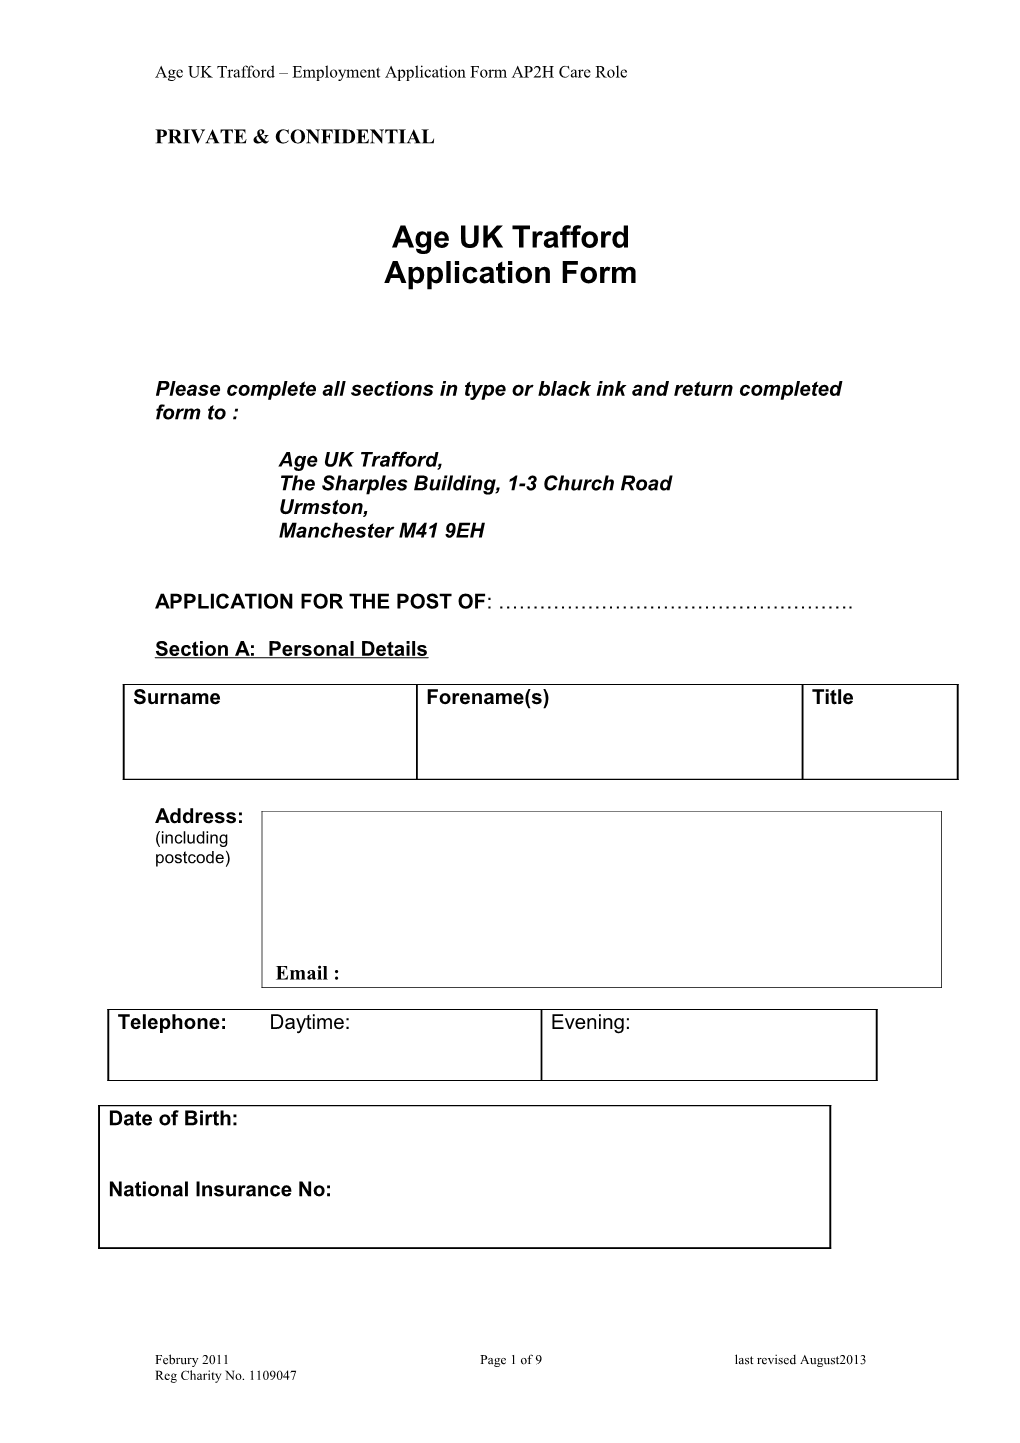 Age UK Trafford Employment Application Form AP2H Care Role